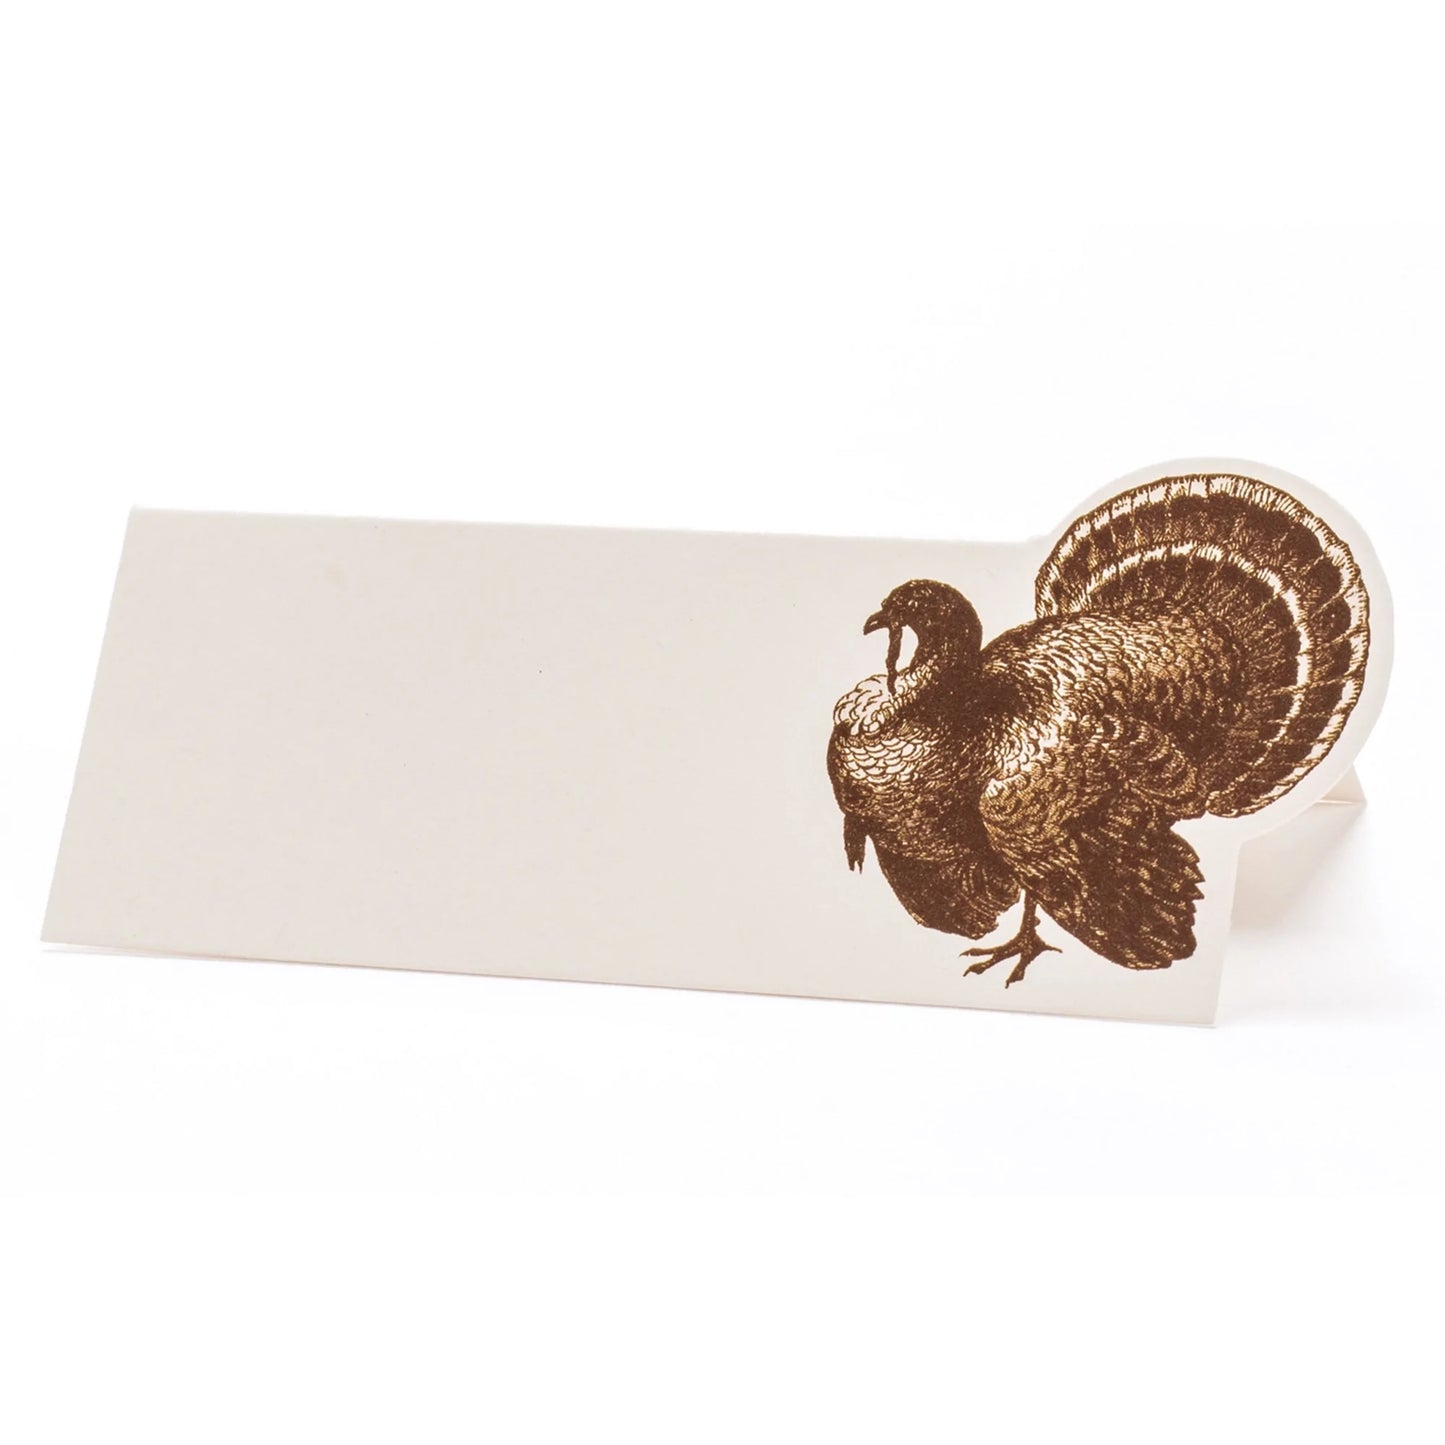 'A close up of the Turkey fold place card